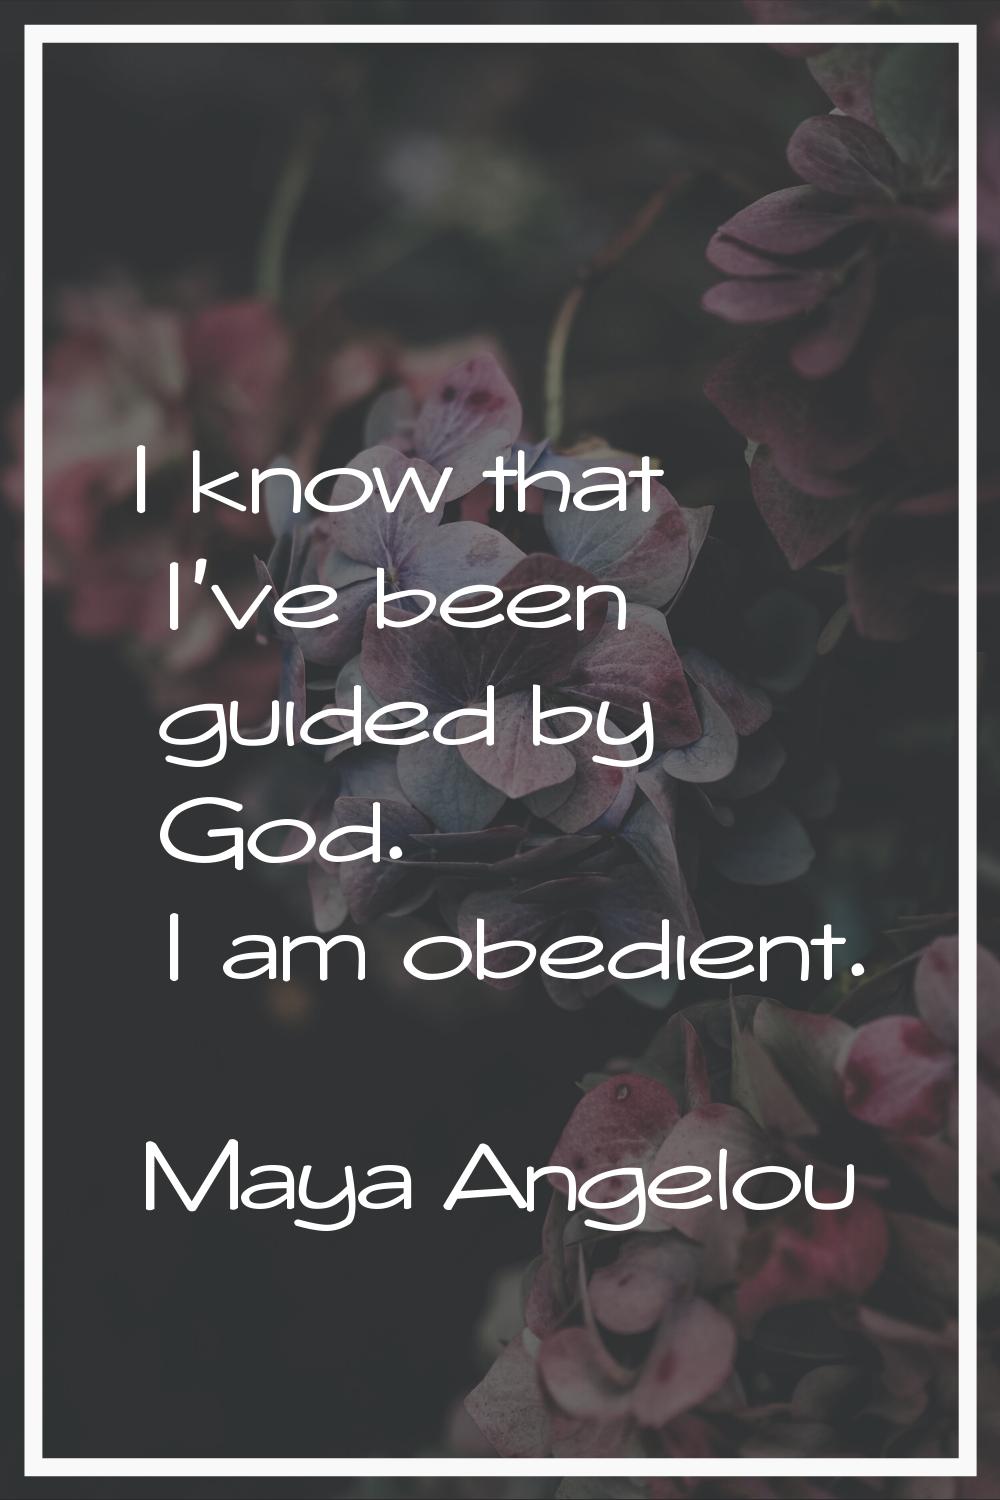 I know that I've been guided by God. I am obedient.